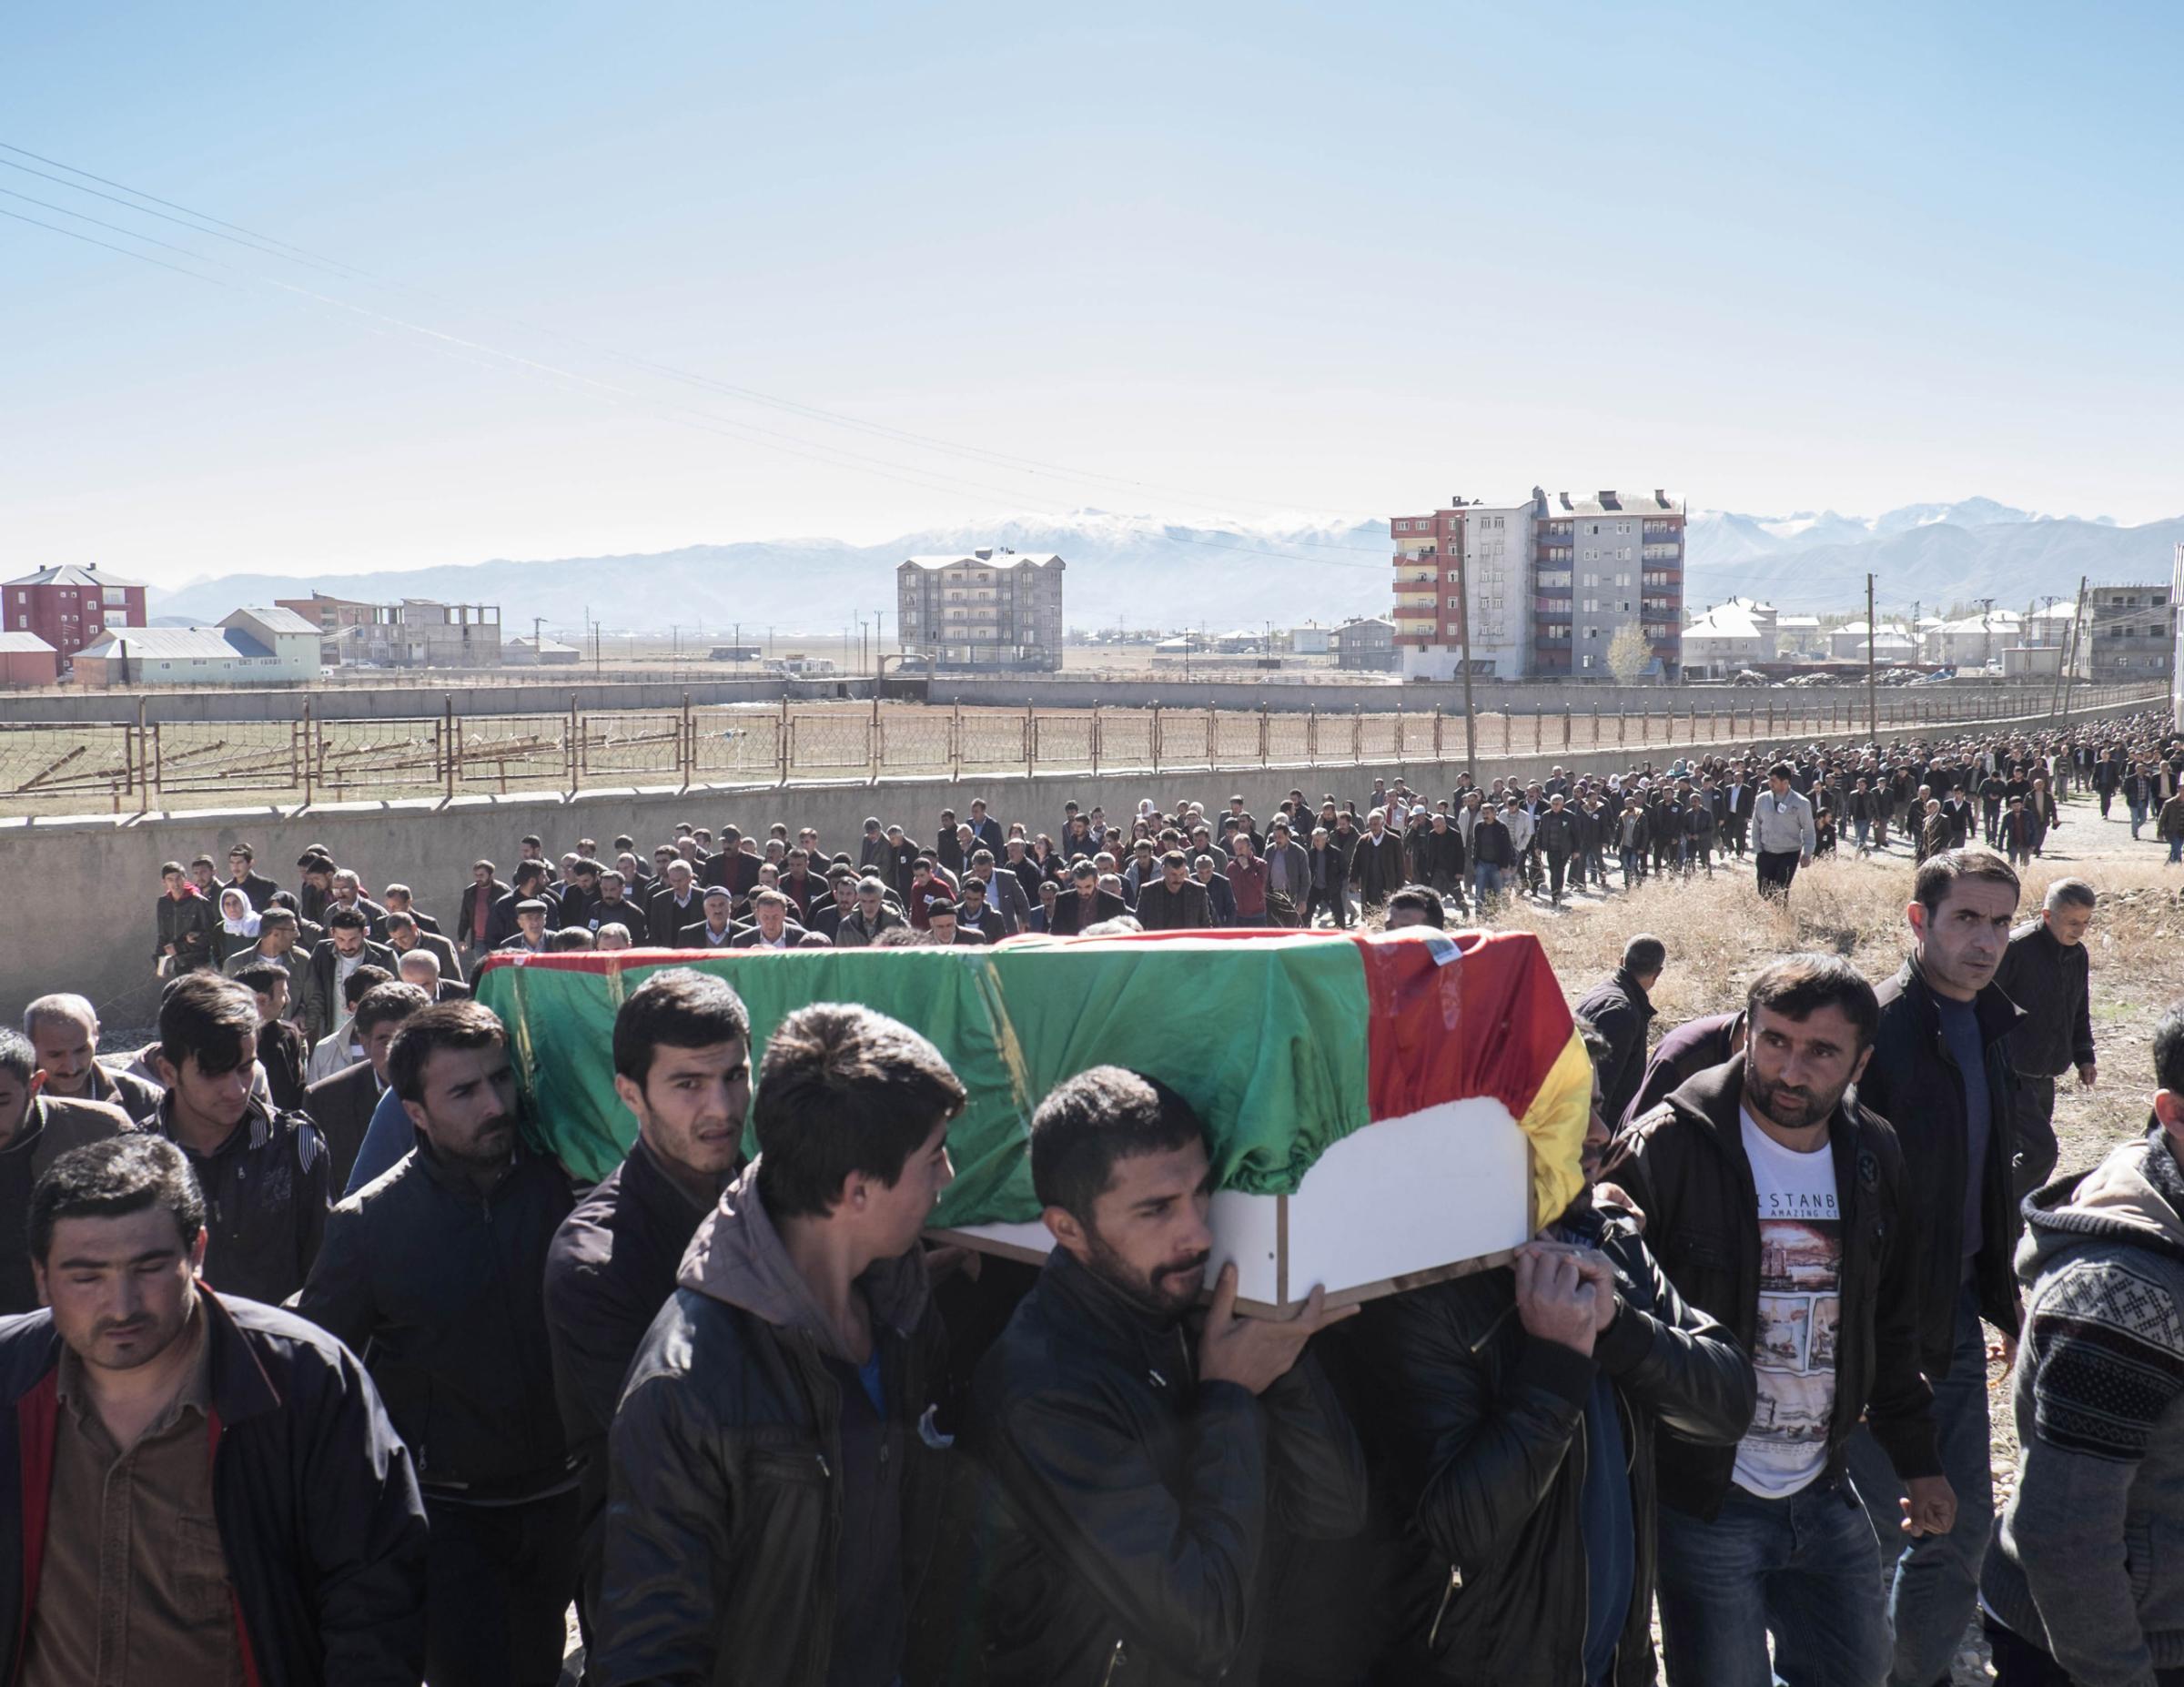 YUKSEKOVA, TURKEY - NOVEMBER 03, 2015: The funerals of Cetin Dara (18) and Dogan Dogma (20), two young Kurds shot to death by a Turkish sniper during a clash in Cumhuriyet, a self declared autonomous neighborhood in Yuksekova. Clashes broke out after that police tried to enter into the neighborhood in early morning. Since July several neighborhoods in the city have declared autonomy and built self-rules, with groups of young Kurds who have taken up arms and raise barricades to prevent the advances of the Turkish forces.